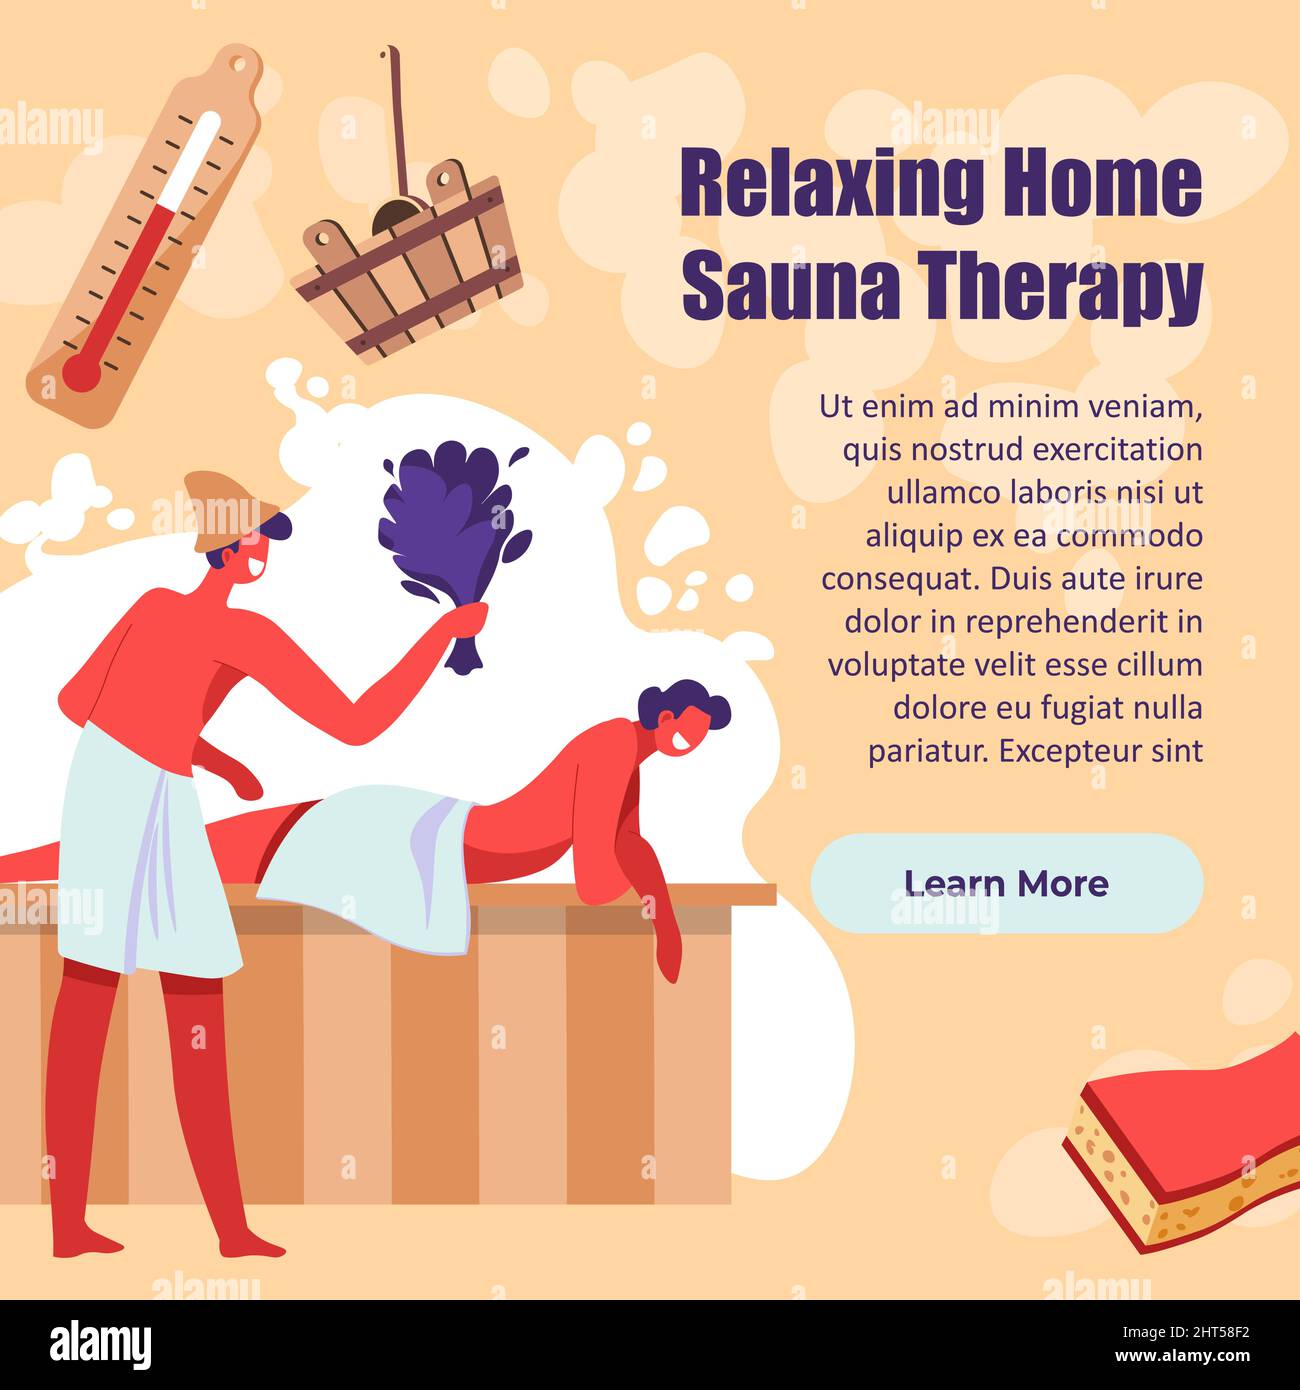 Relaxing home sauna therapy, bathing vector web Stock Vector